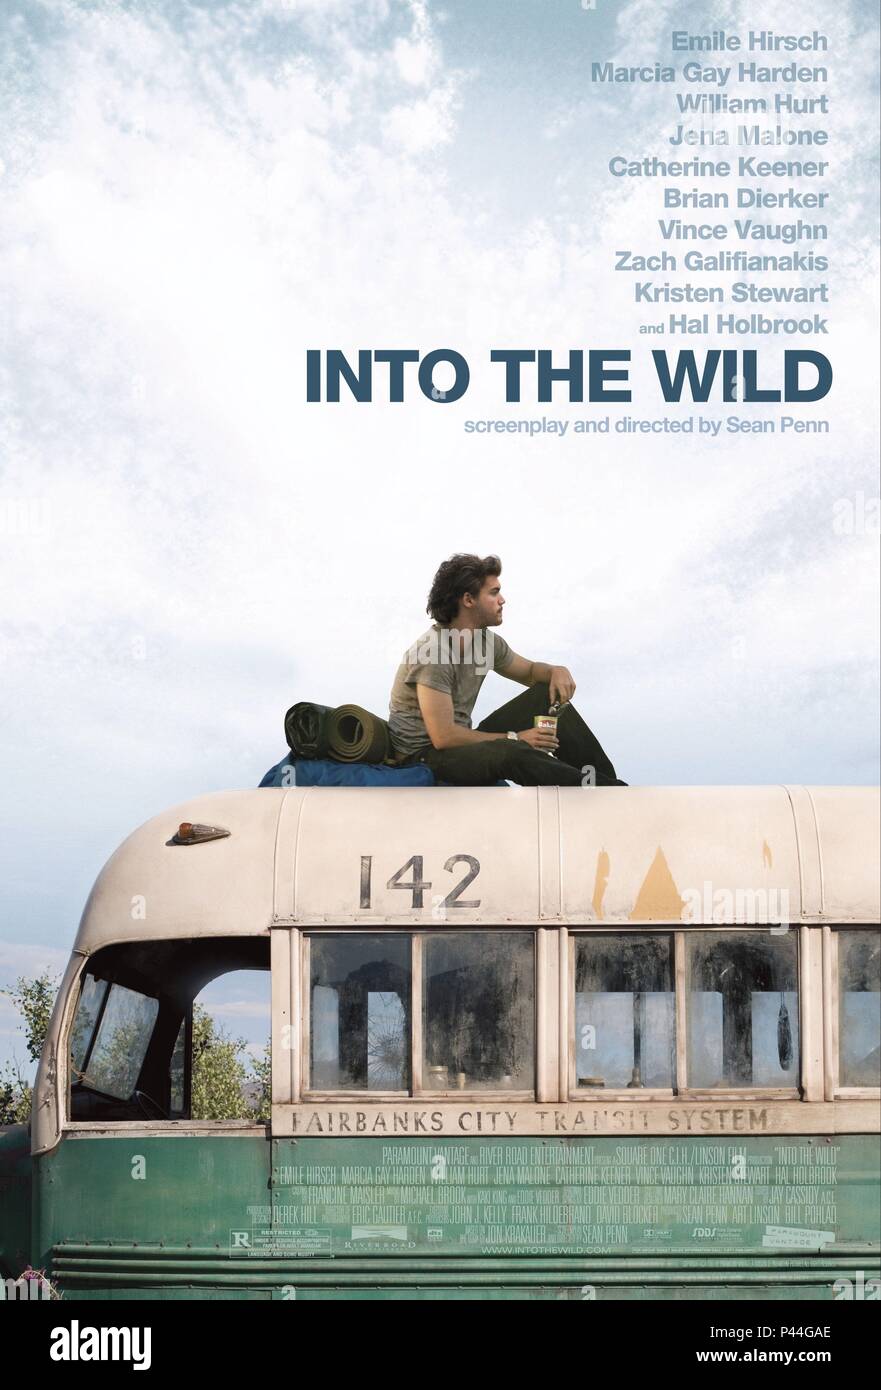 Original Film Title: INTO THE WILD.  English Title: INTO THE WILD.  Film Director: SEAN PENN.  Year: 2007. Credit: PARAMOUNT VANTAGE/RIVER ROAD FILMS/ART LINSON PRODUCTIONS/ / Album Stock Photo